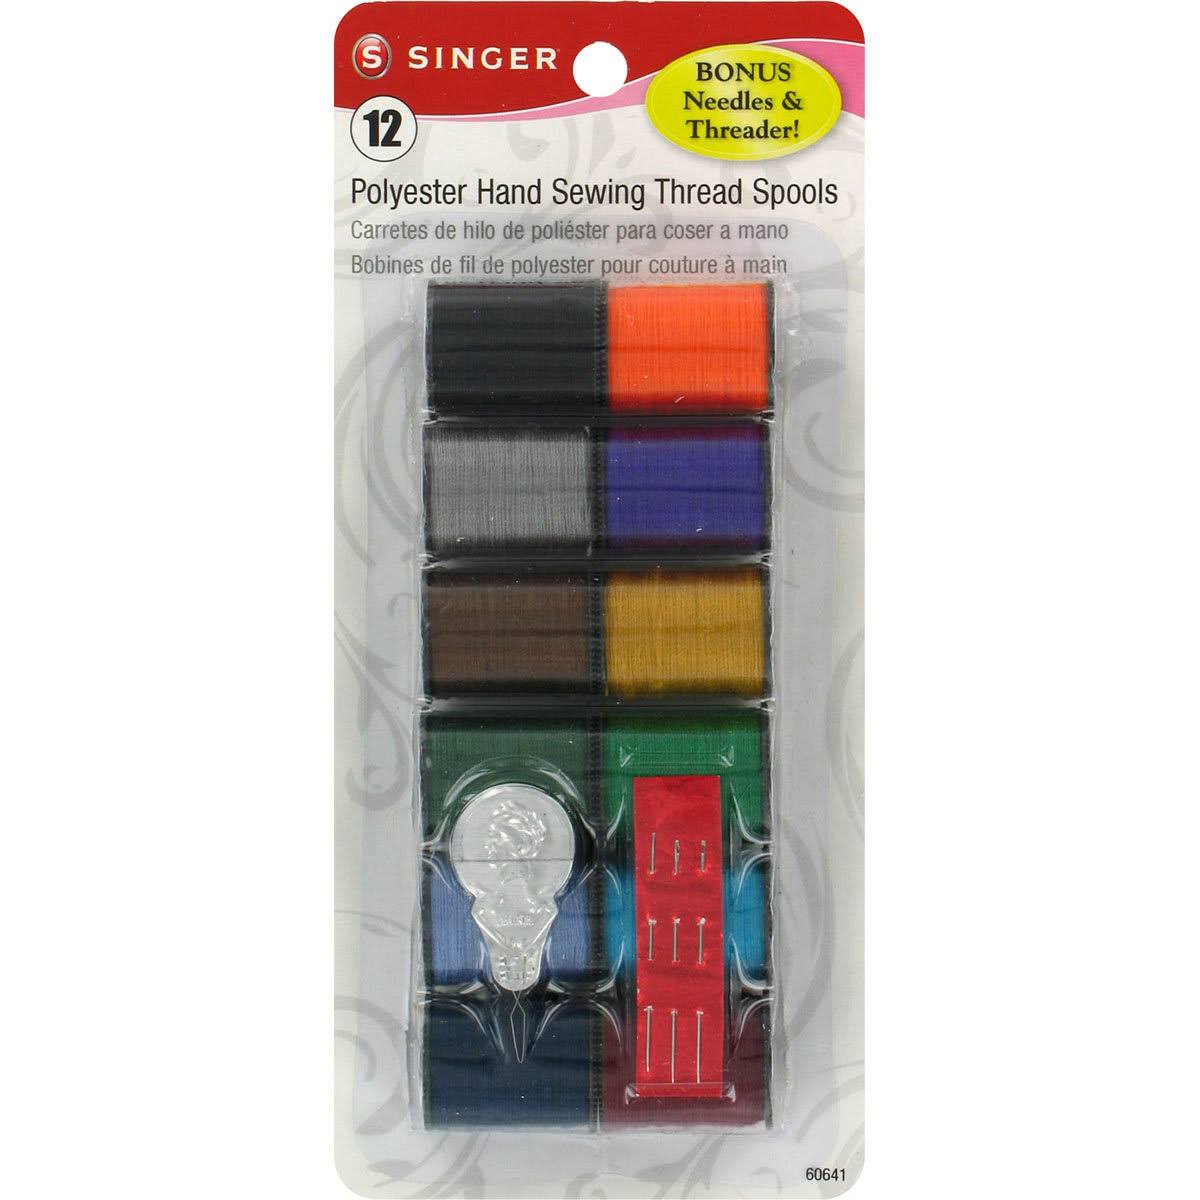 Singer Polyester Hand Sewing Thread Spools - 12pack